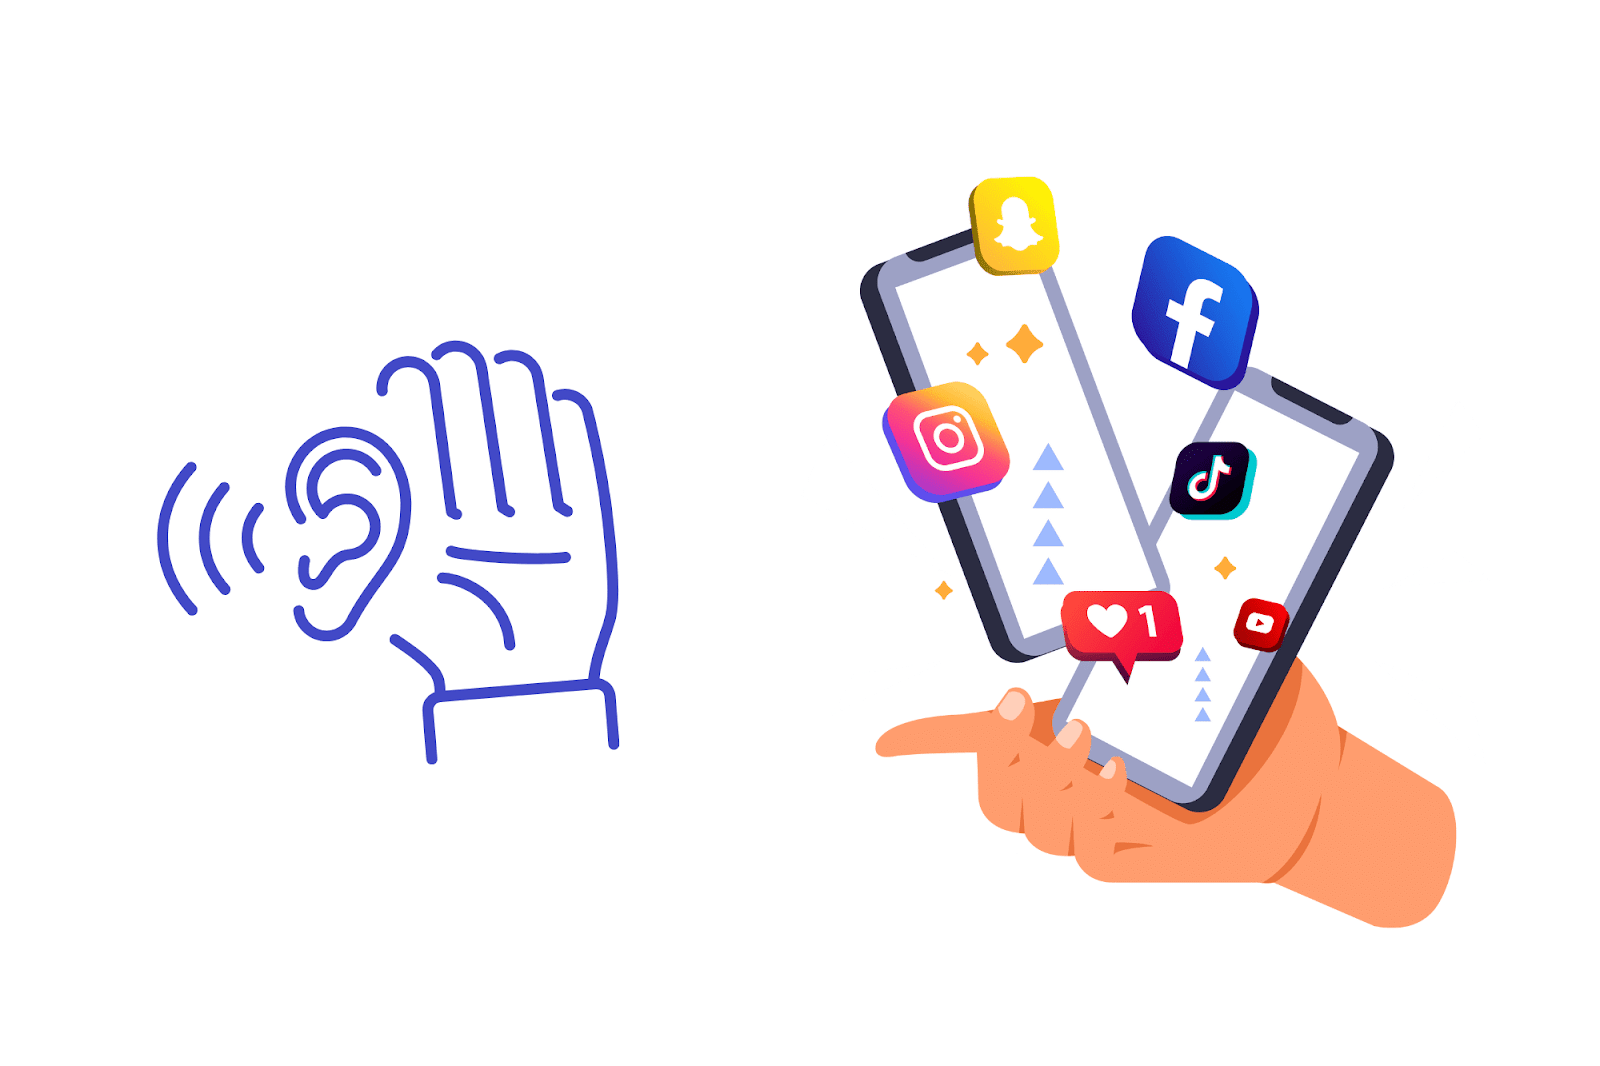 Social listening as an audience targeting strategy